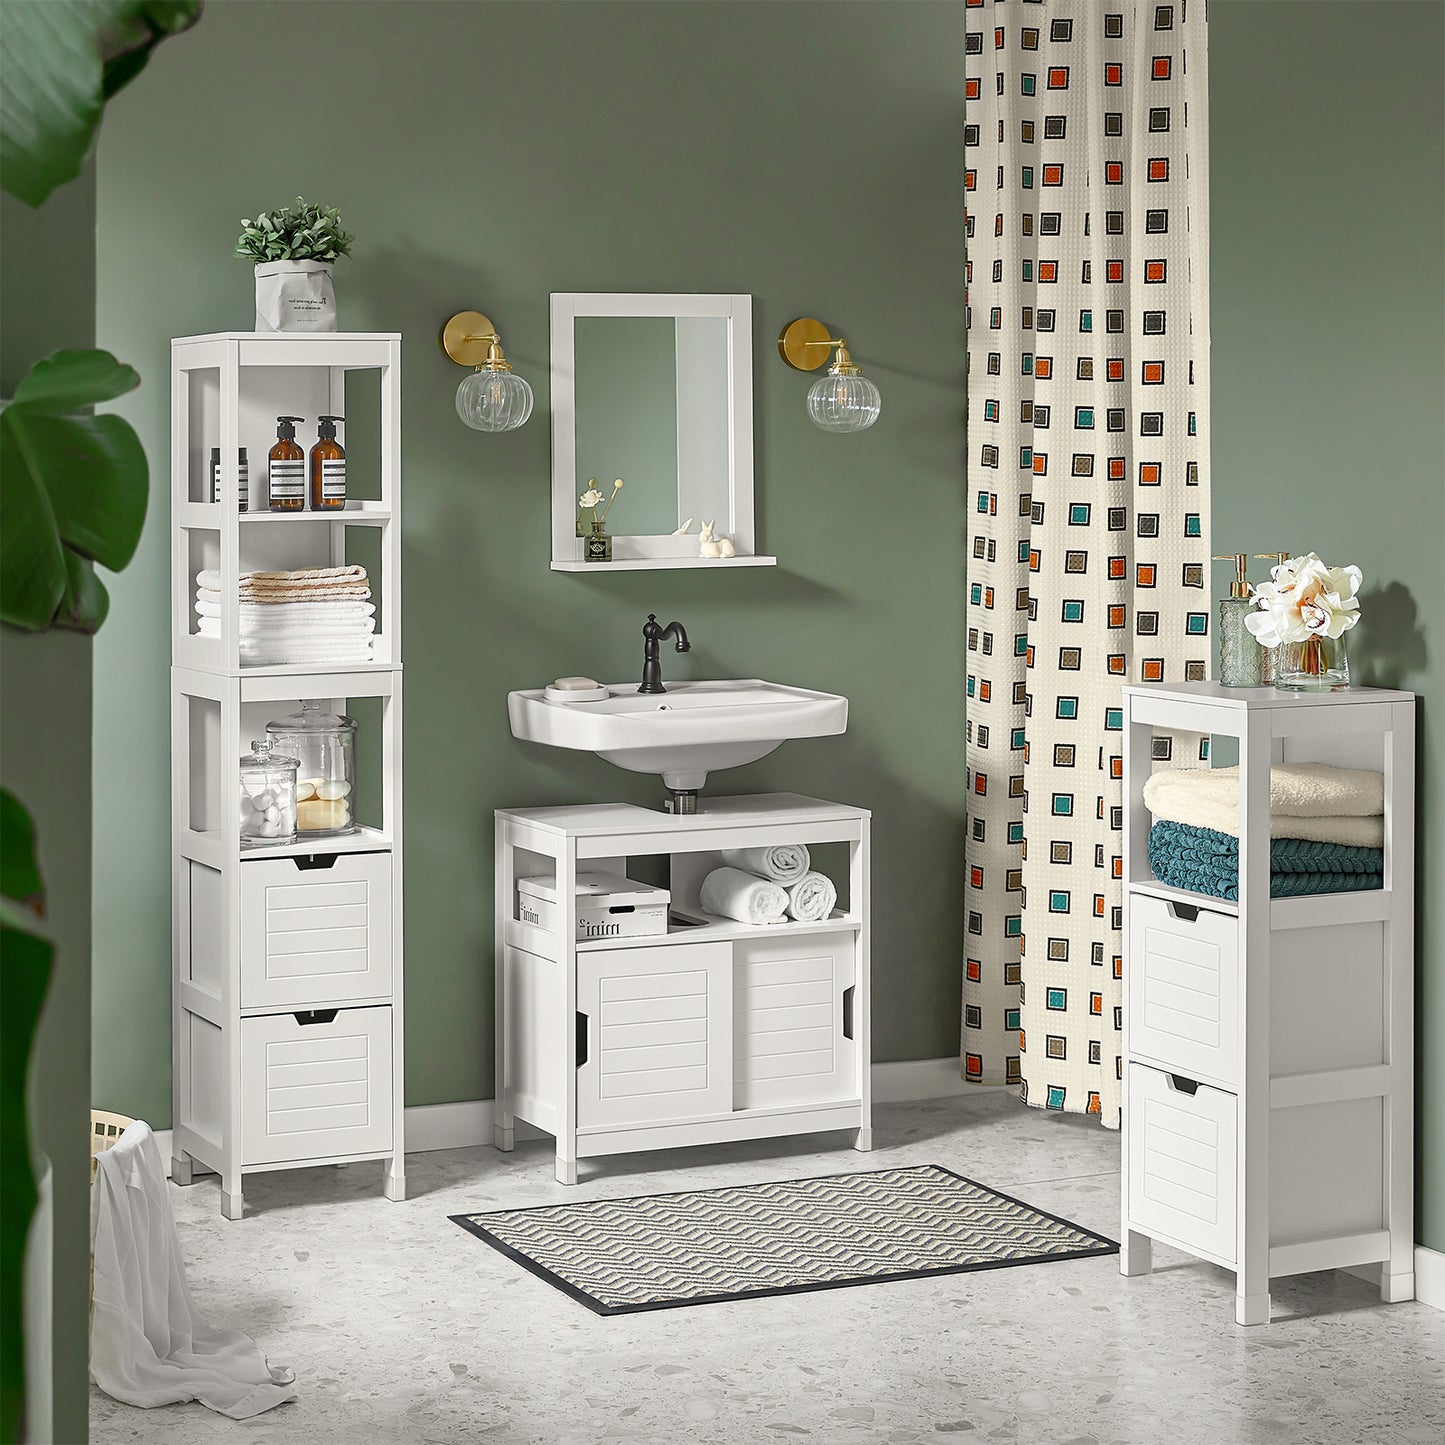 SoBuy Freestanding Cabinet, 2 Drawers and Shelf, Cupboard for Bathroom, Bedroom, Standing Shelves with Drawers